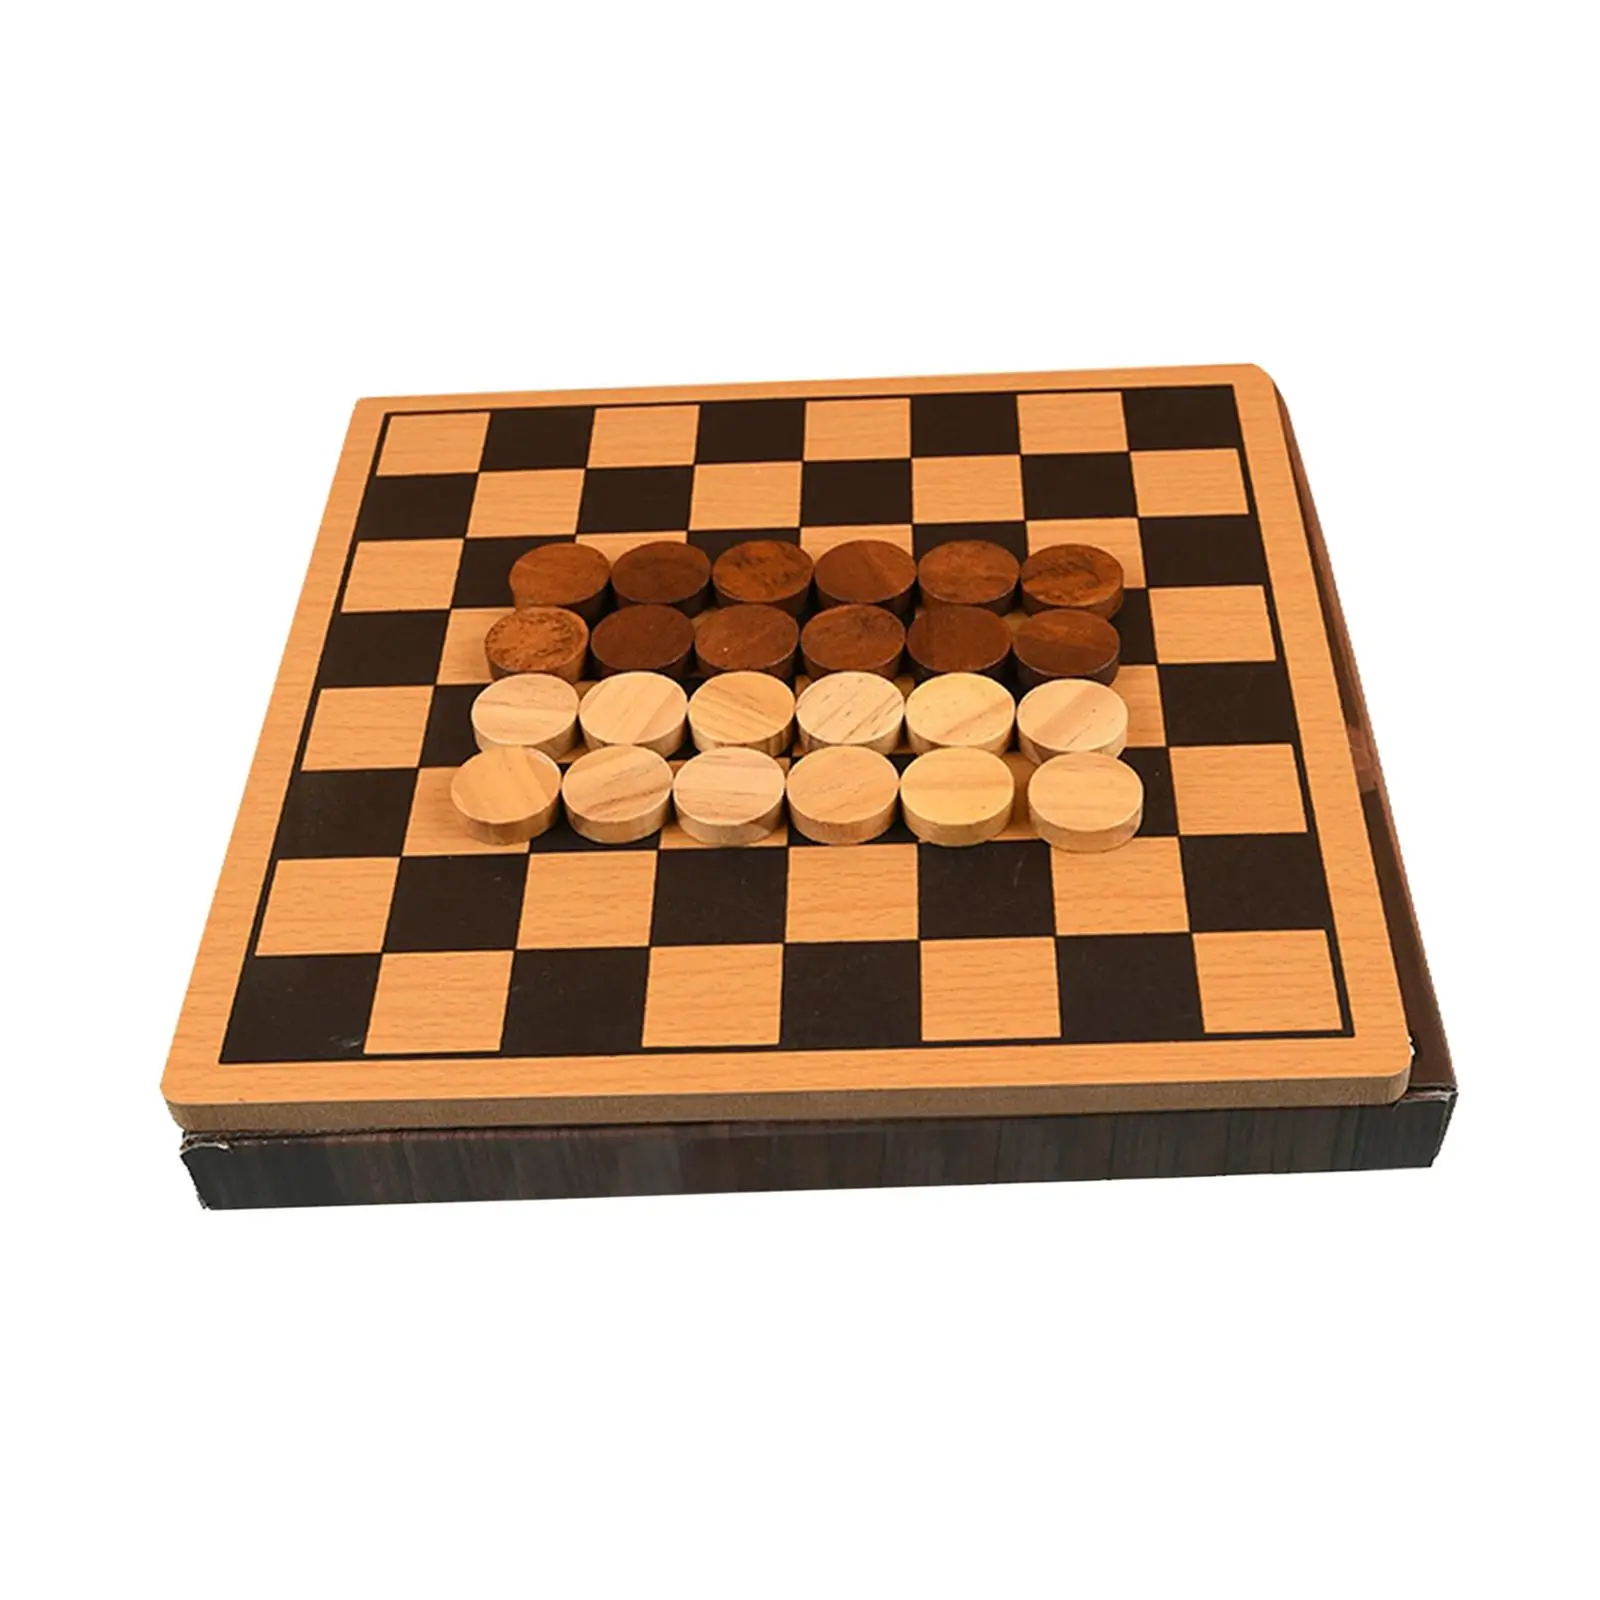 Wooden Chess Game Set Early Education Toys Retro Style Chessmen Chess Pieces for Kids Home Tabletop Traveling Gifts